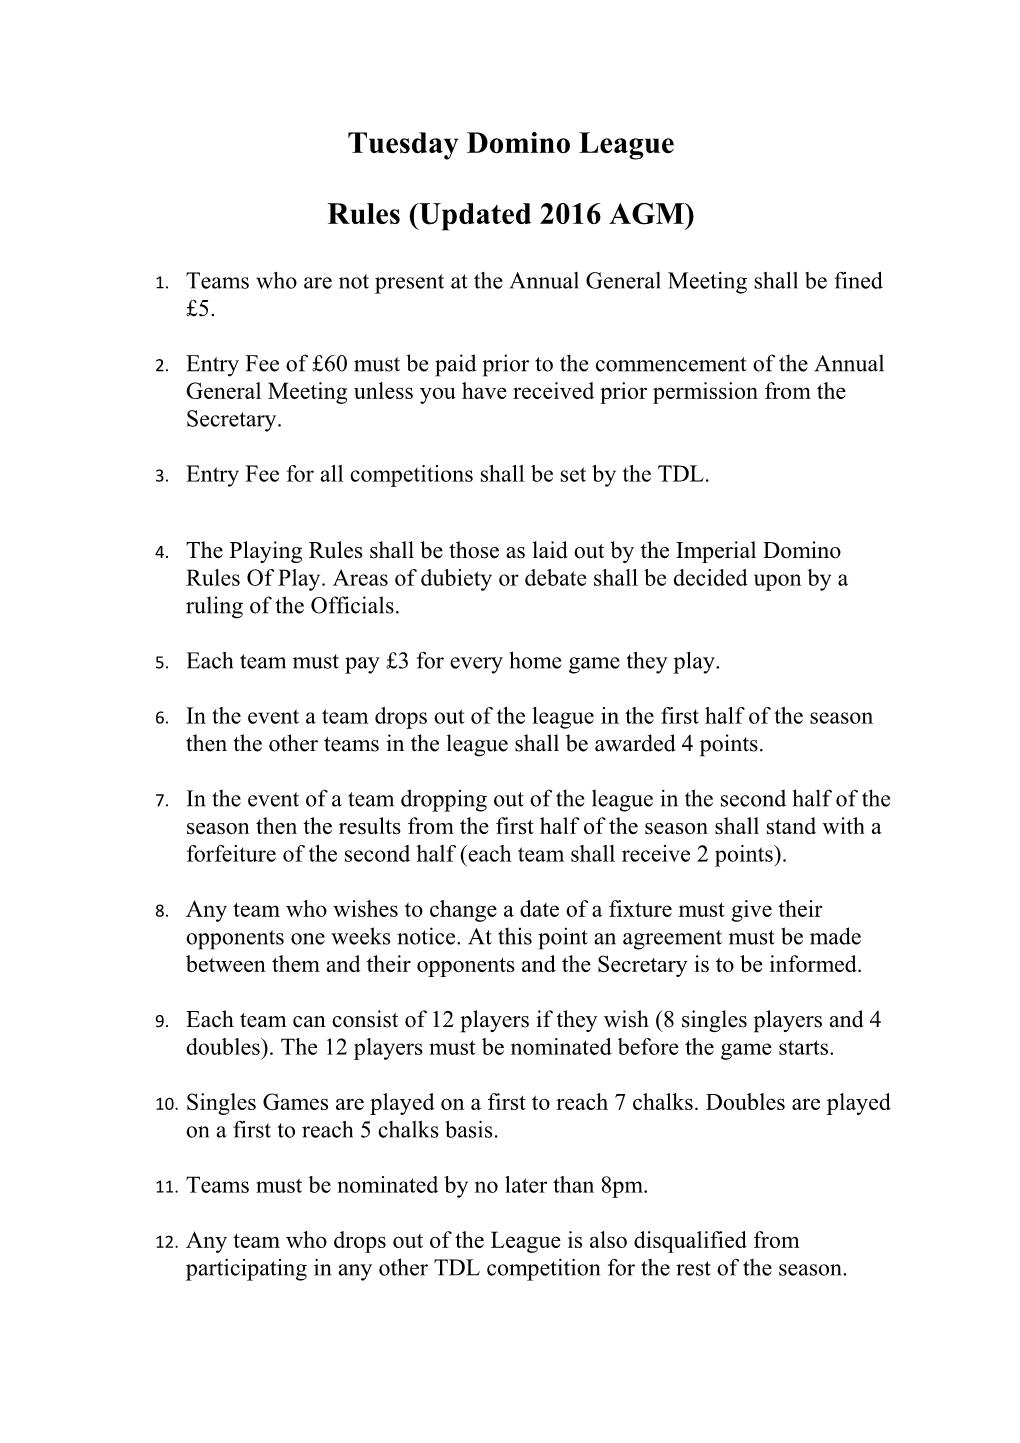 Rules (Updated 2016 AGM)